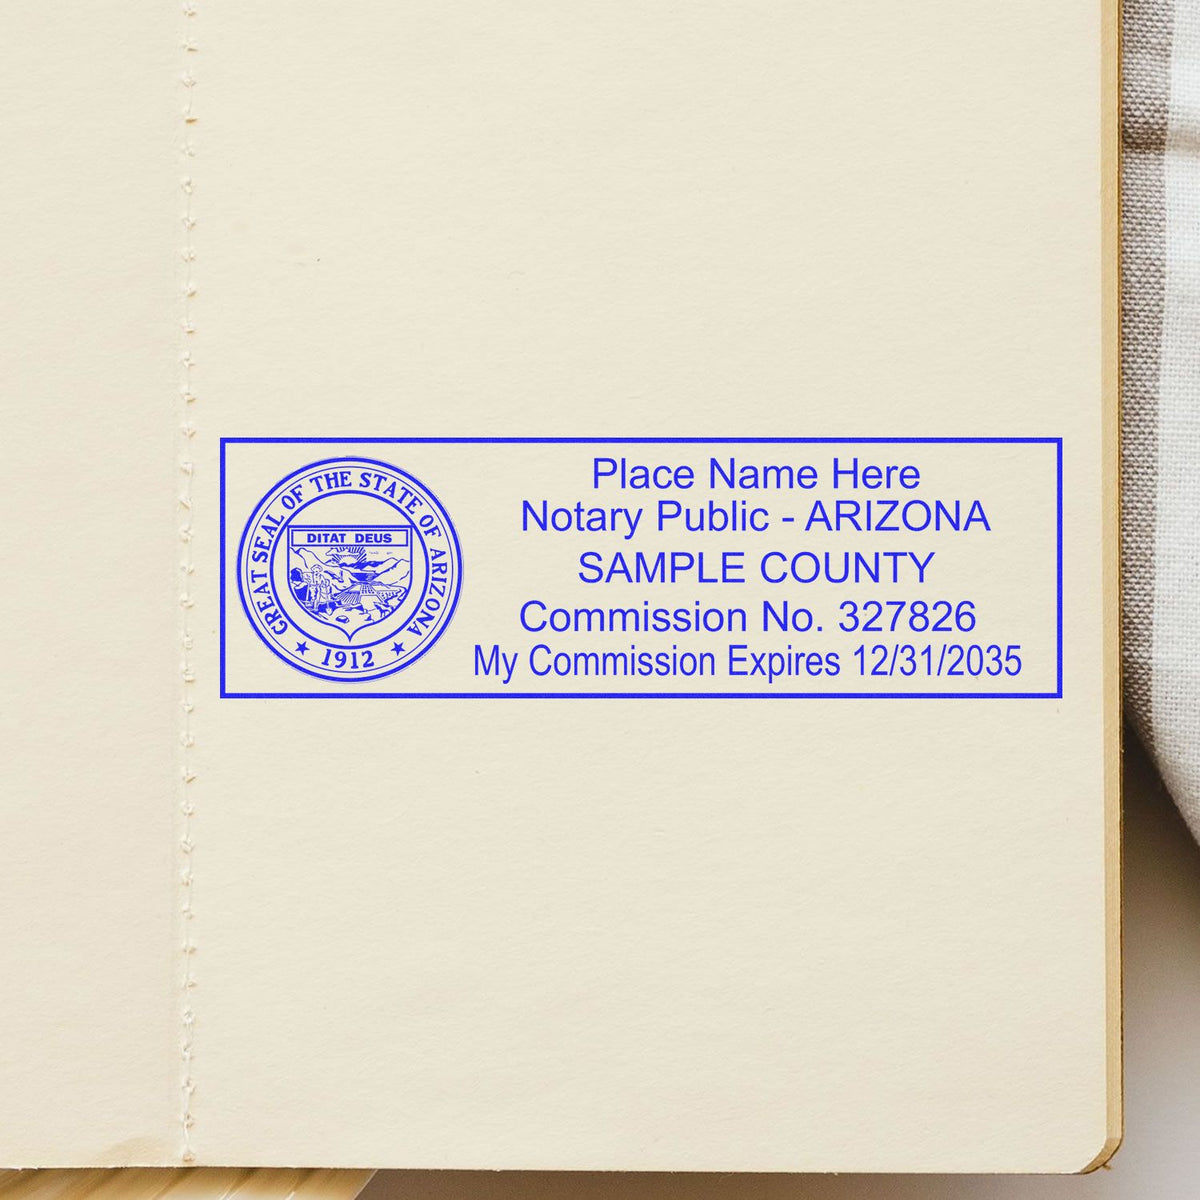 An alternative view of the Super Slim Arizona Notary Public Stamp stamped on a sheet of paper showing the image in use